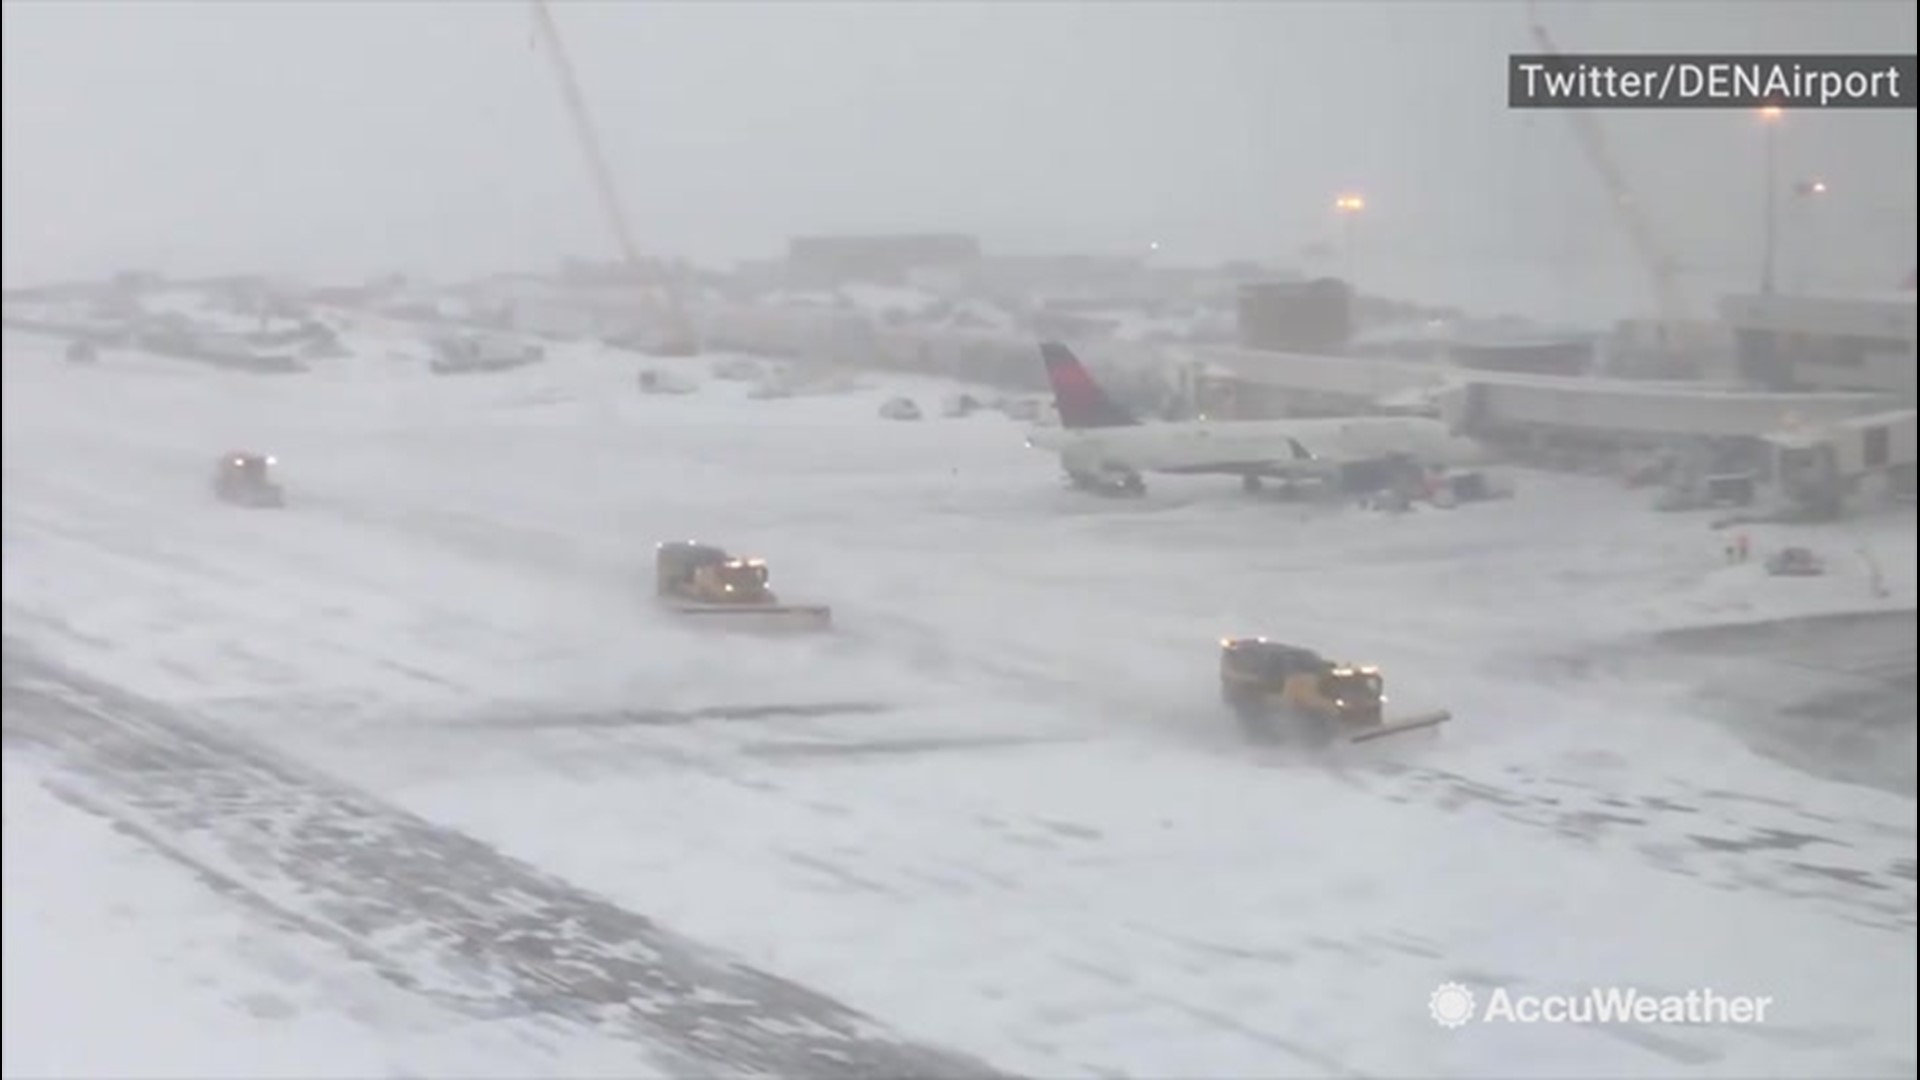 Crews are working hard to keep runways and taxiways open at the Denver International Airport. Many airlines are resuming operations in the early afternoon.